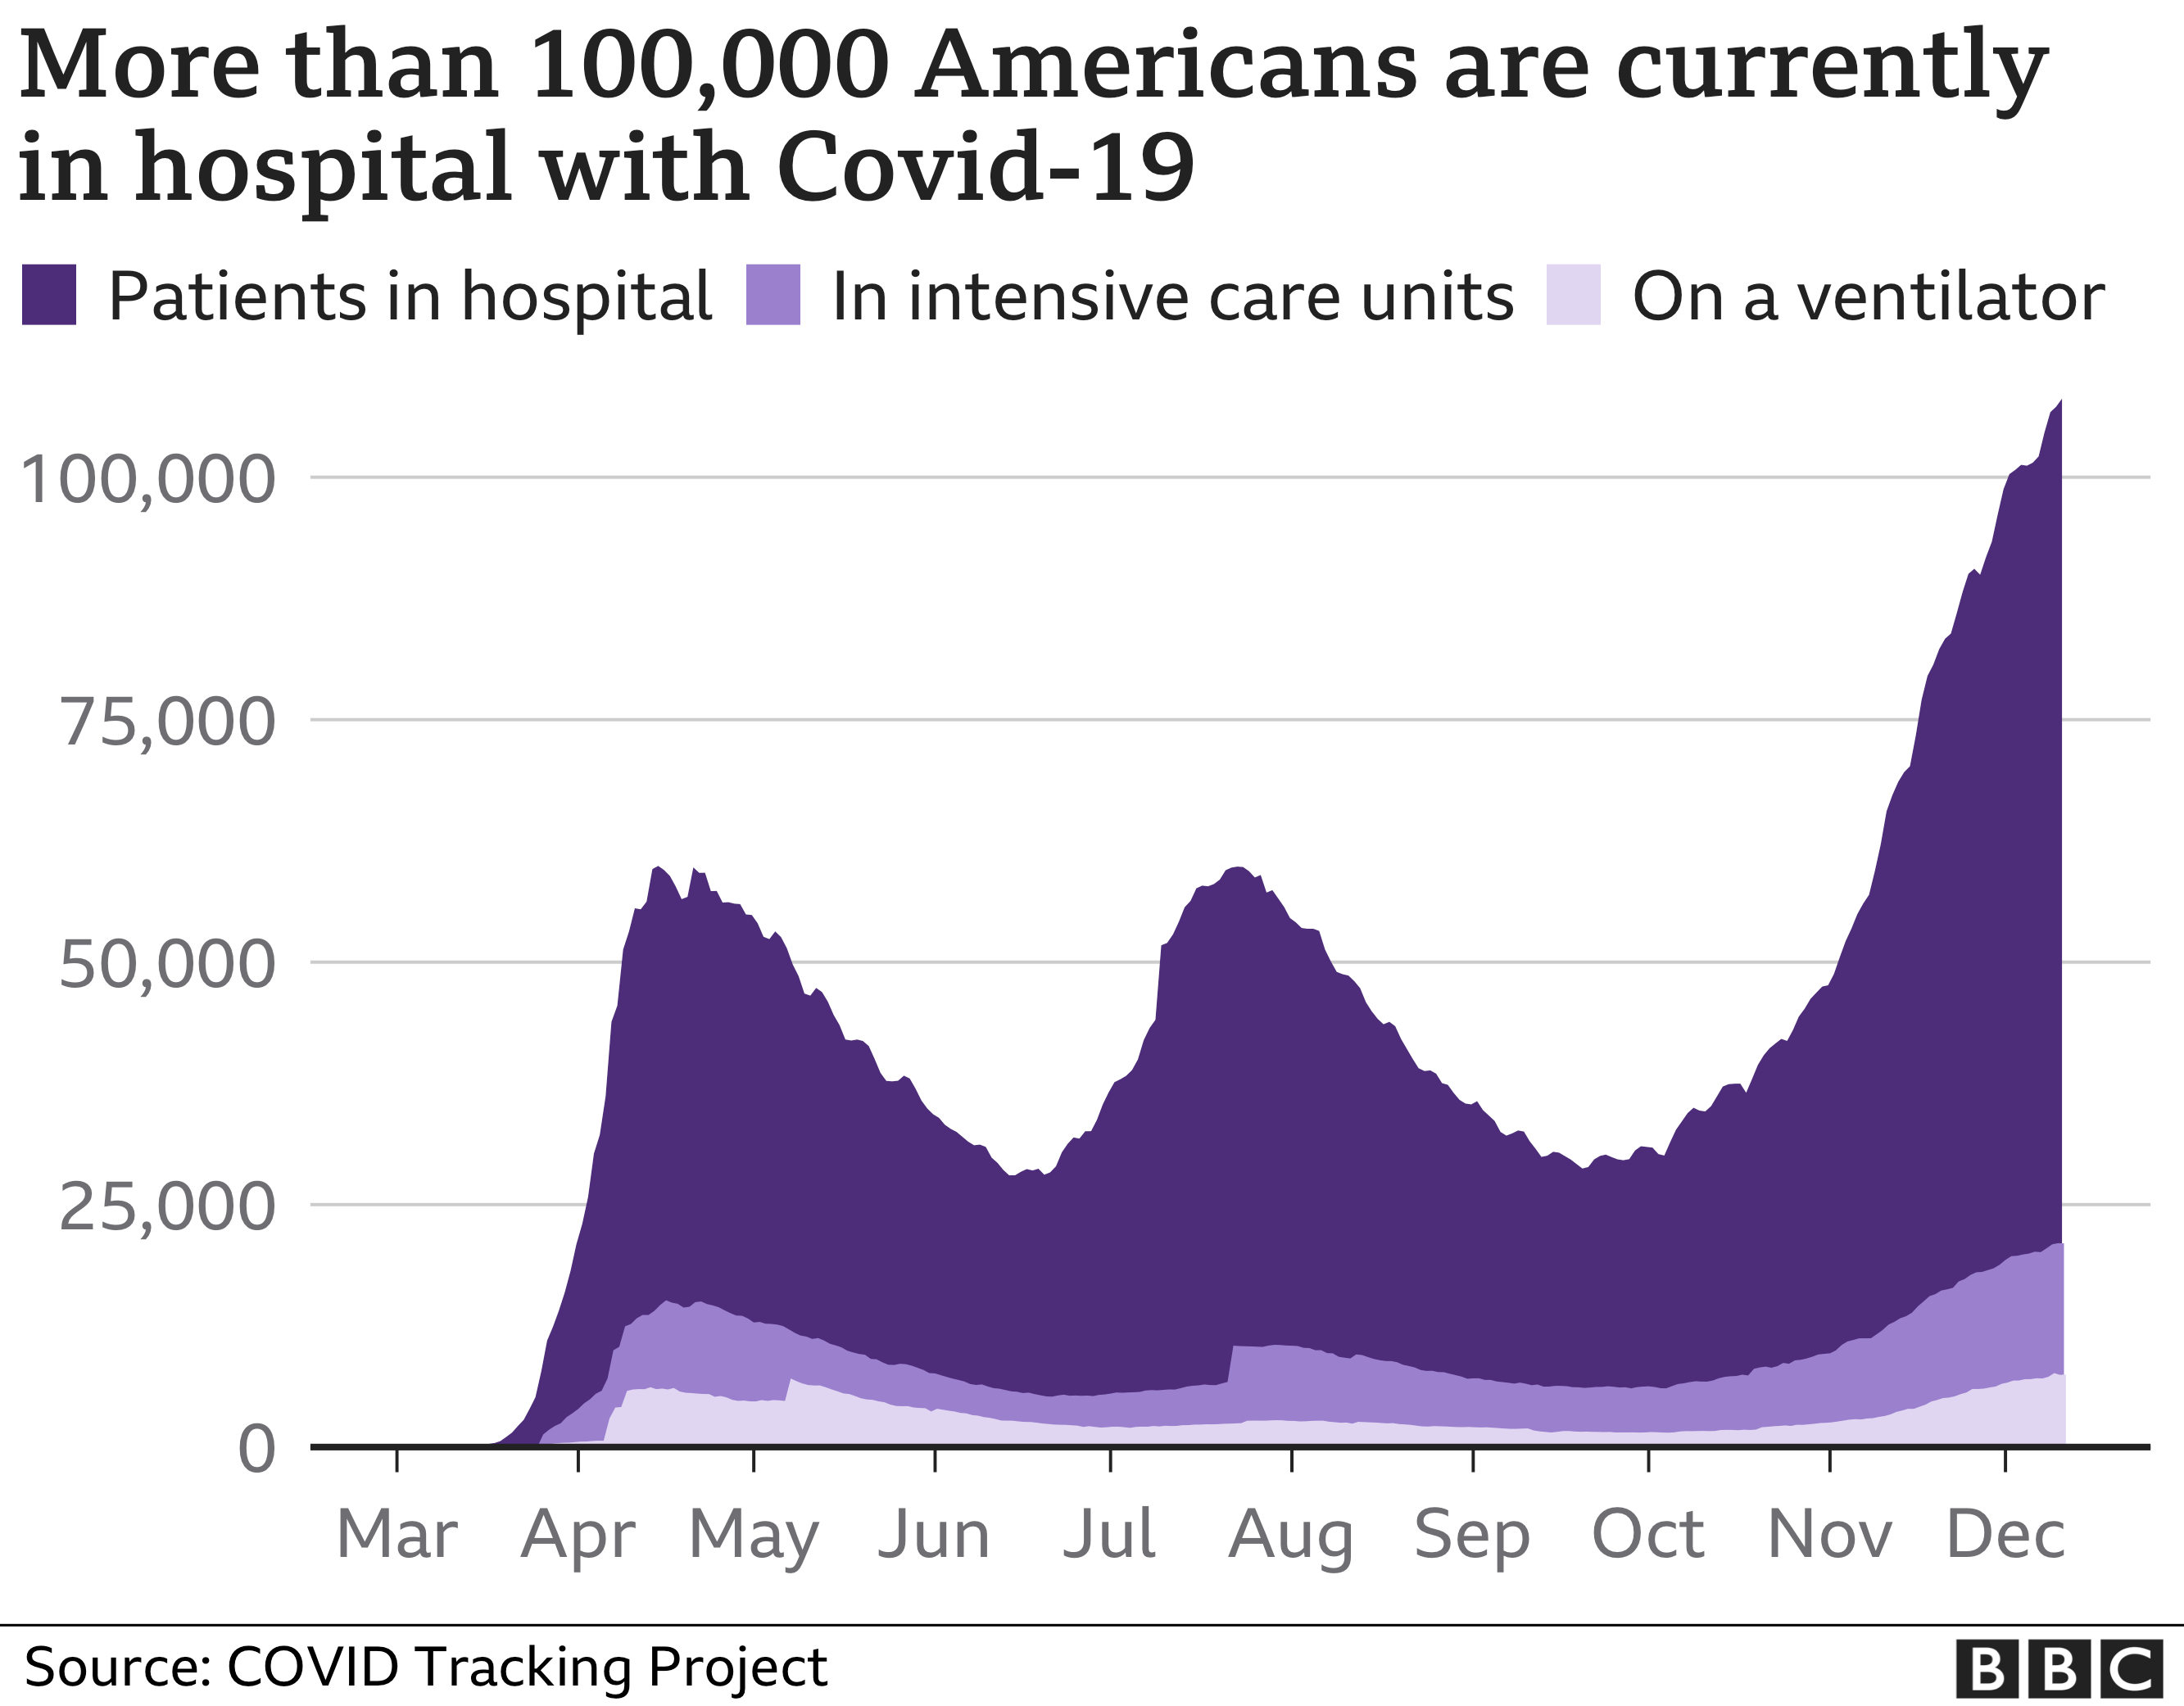 Chart showing the number of Covid-19 patients in US hospitals since the start of the pandemic